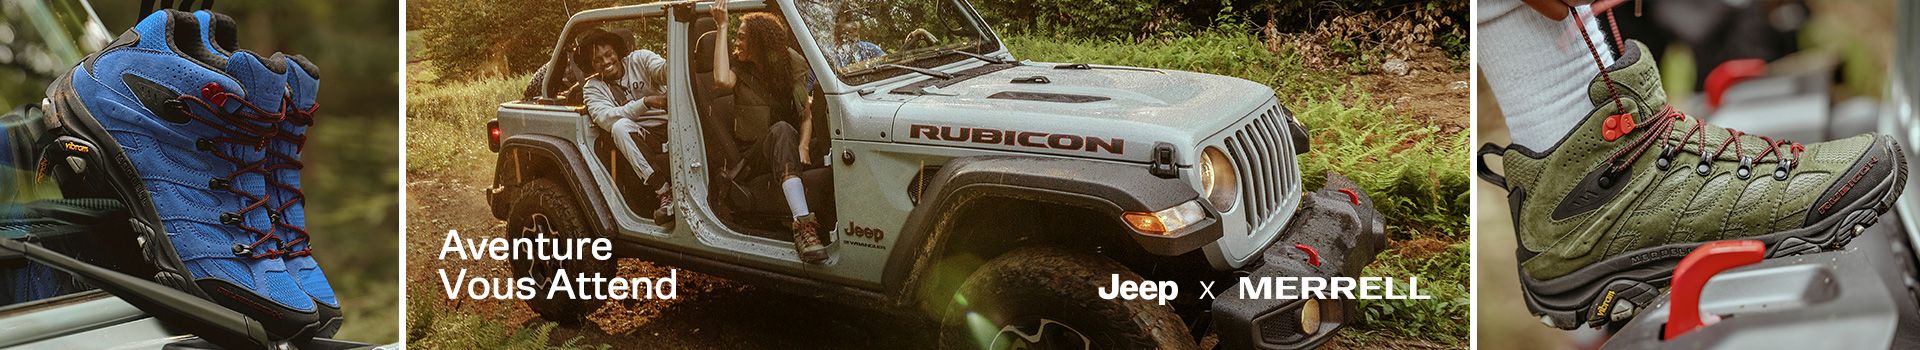 Aventure vous attend. Jeep x MERRELL.